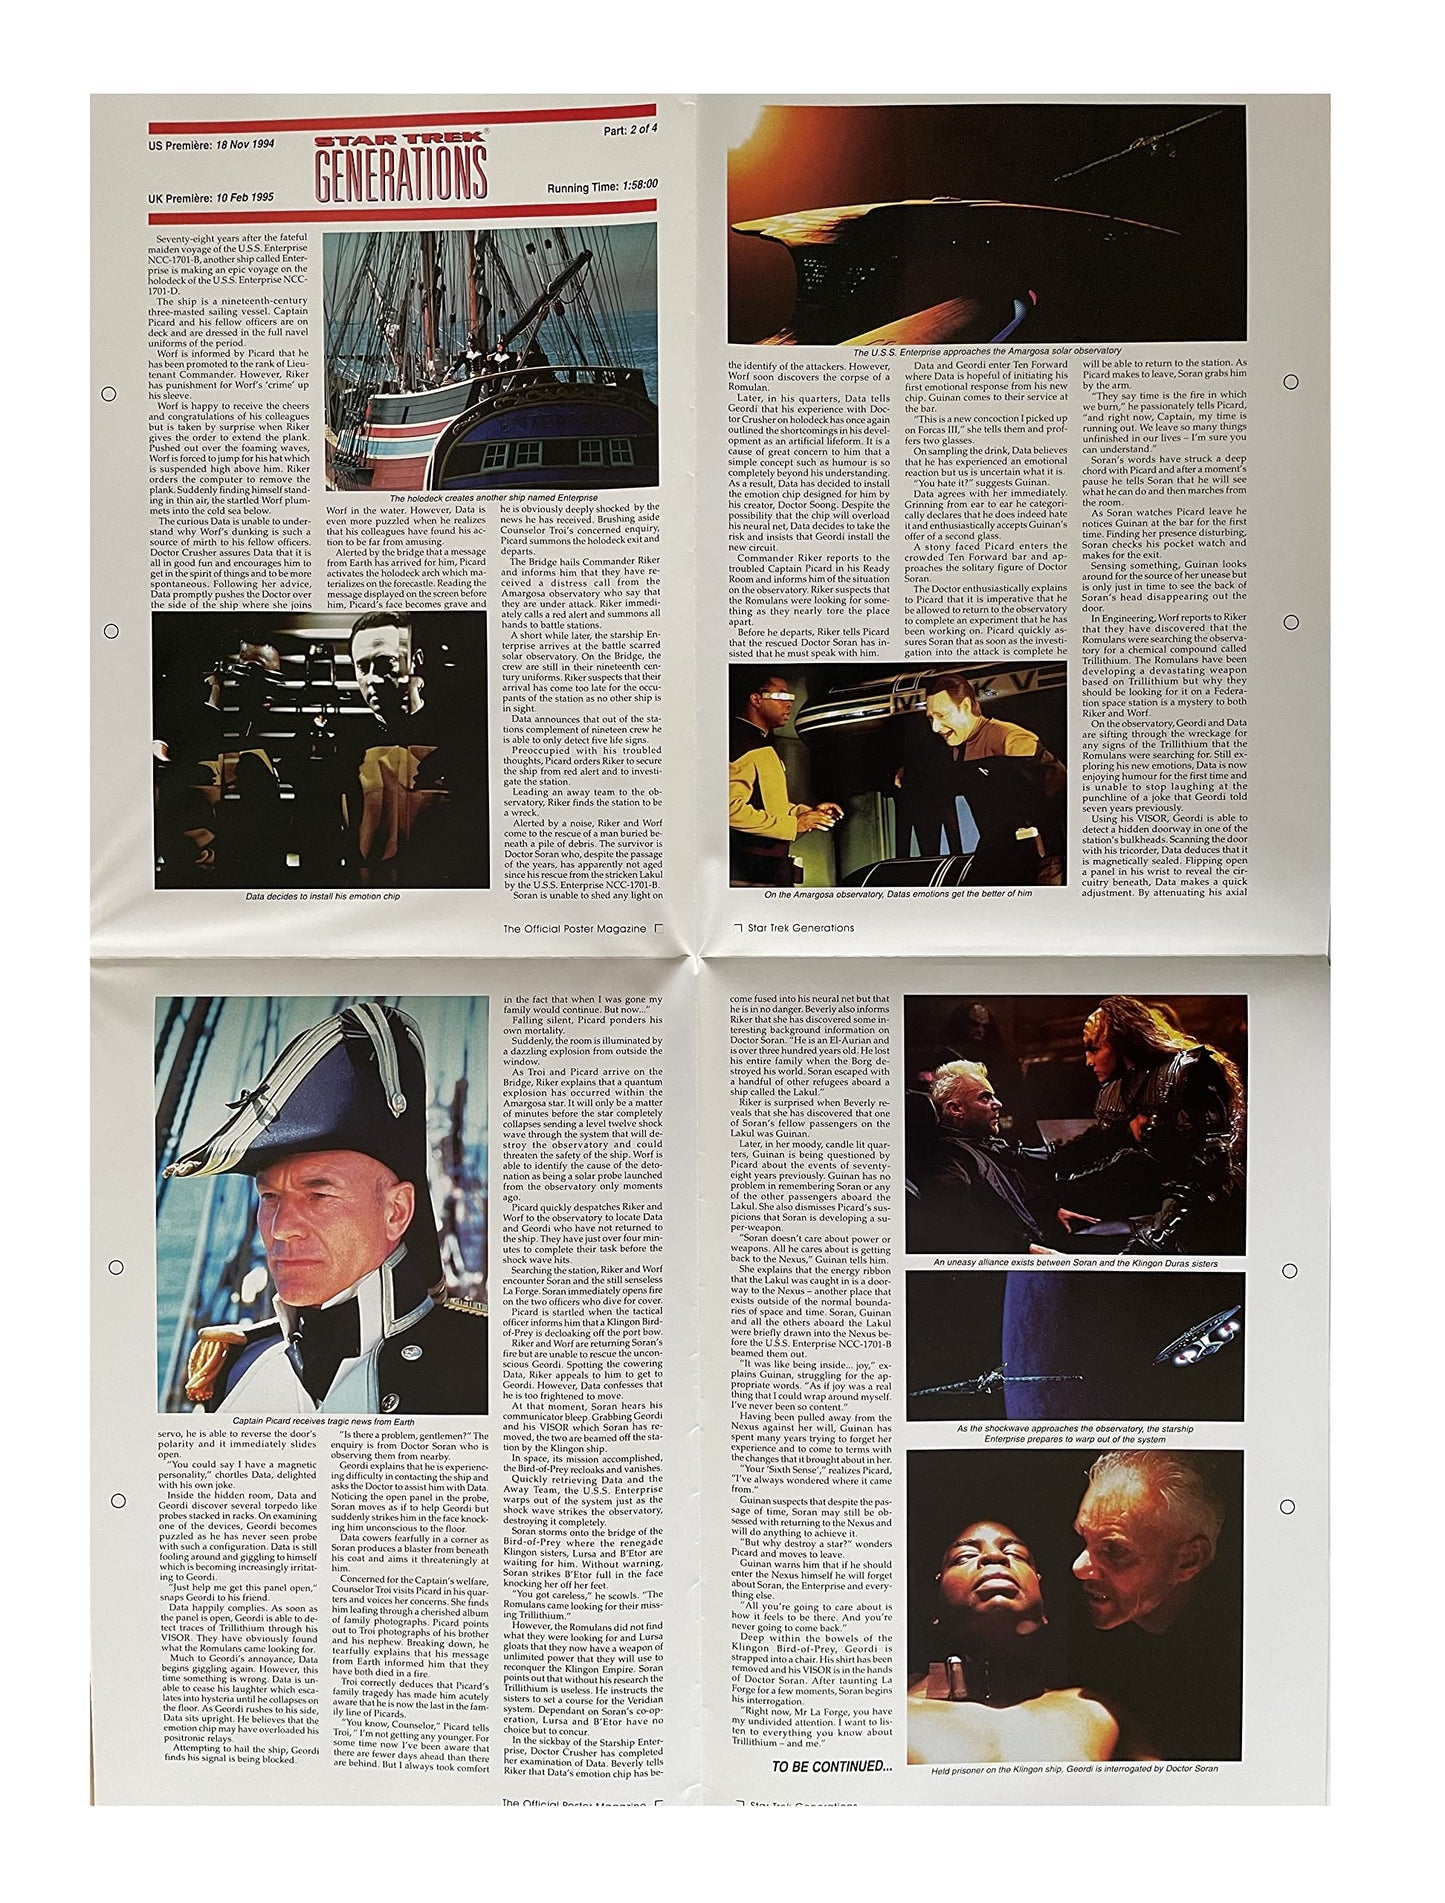 Vintage 1995 Star Trek Generations The Official Poster Magazine Issue No. 2 - Great Collectors Edition - Brand New Shop Stock Room Find